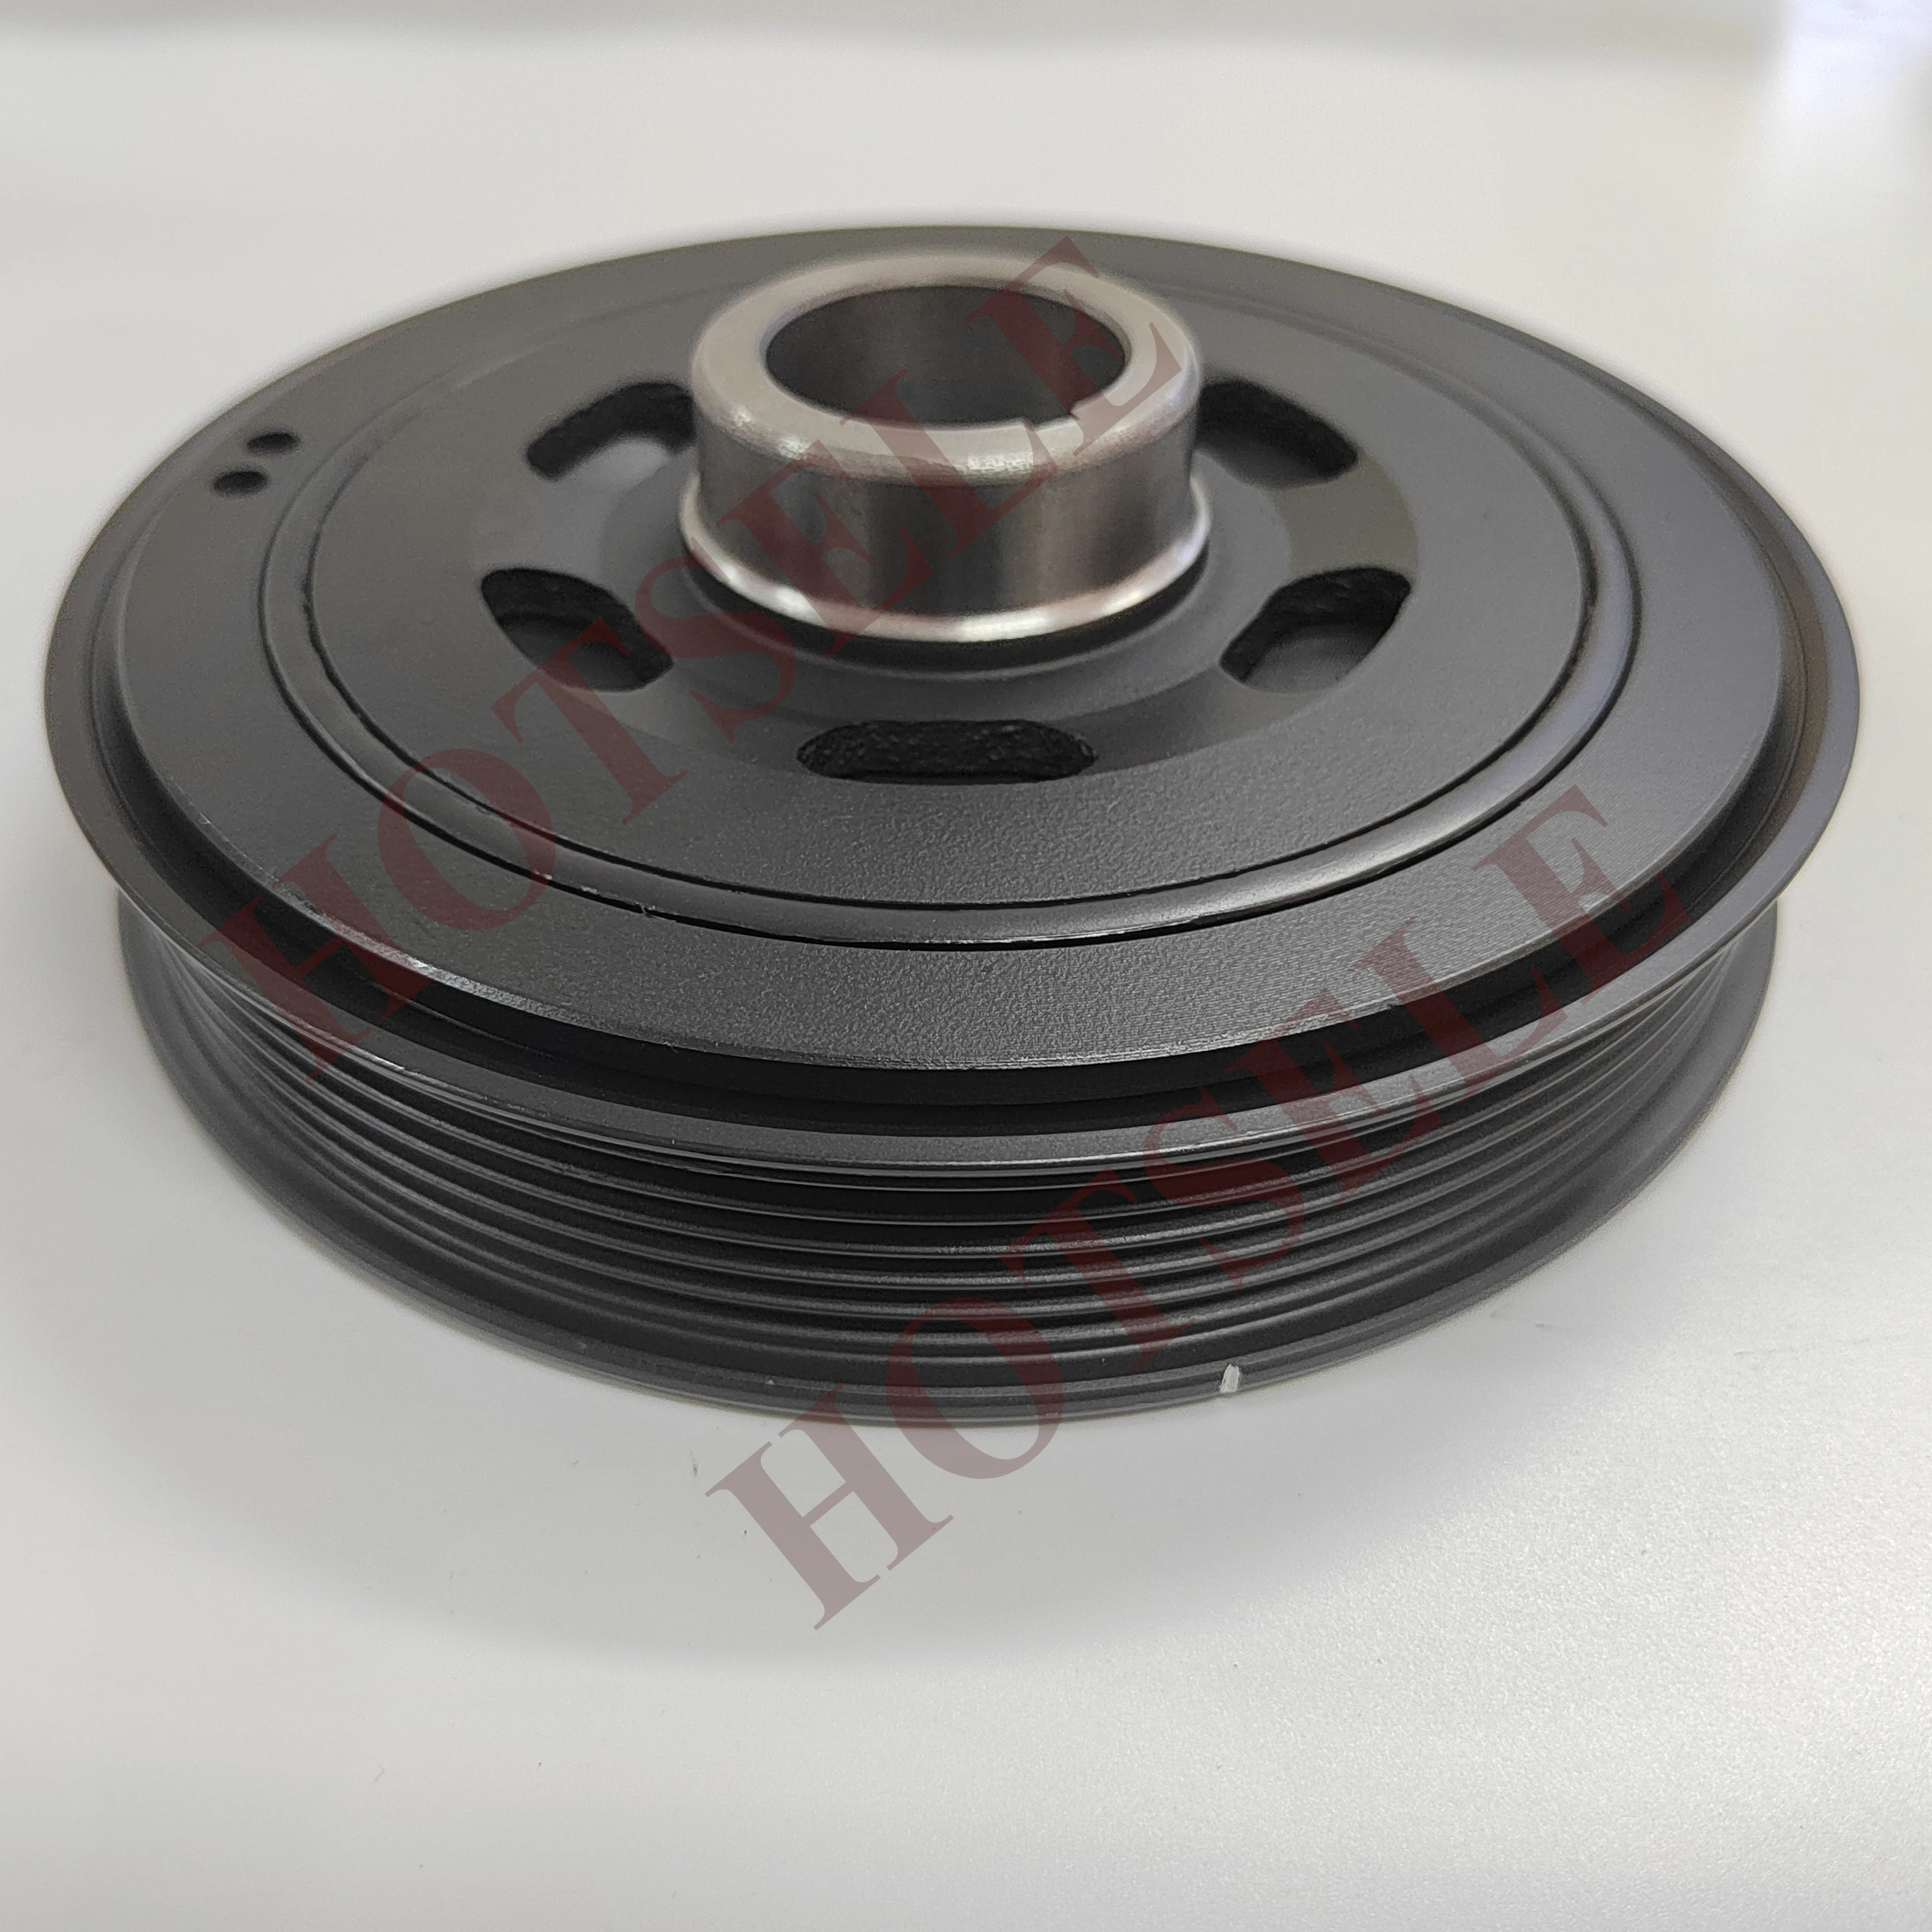 

Genuine Isolation Damper Assy Fan Belt Pulley Assembly 6720300003 For Ssangyong Rexton Korando C Sports Stavic